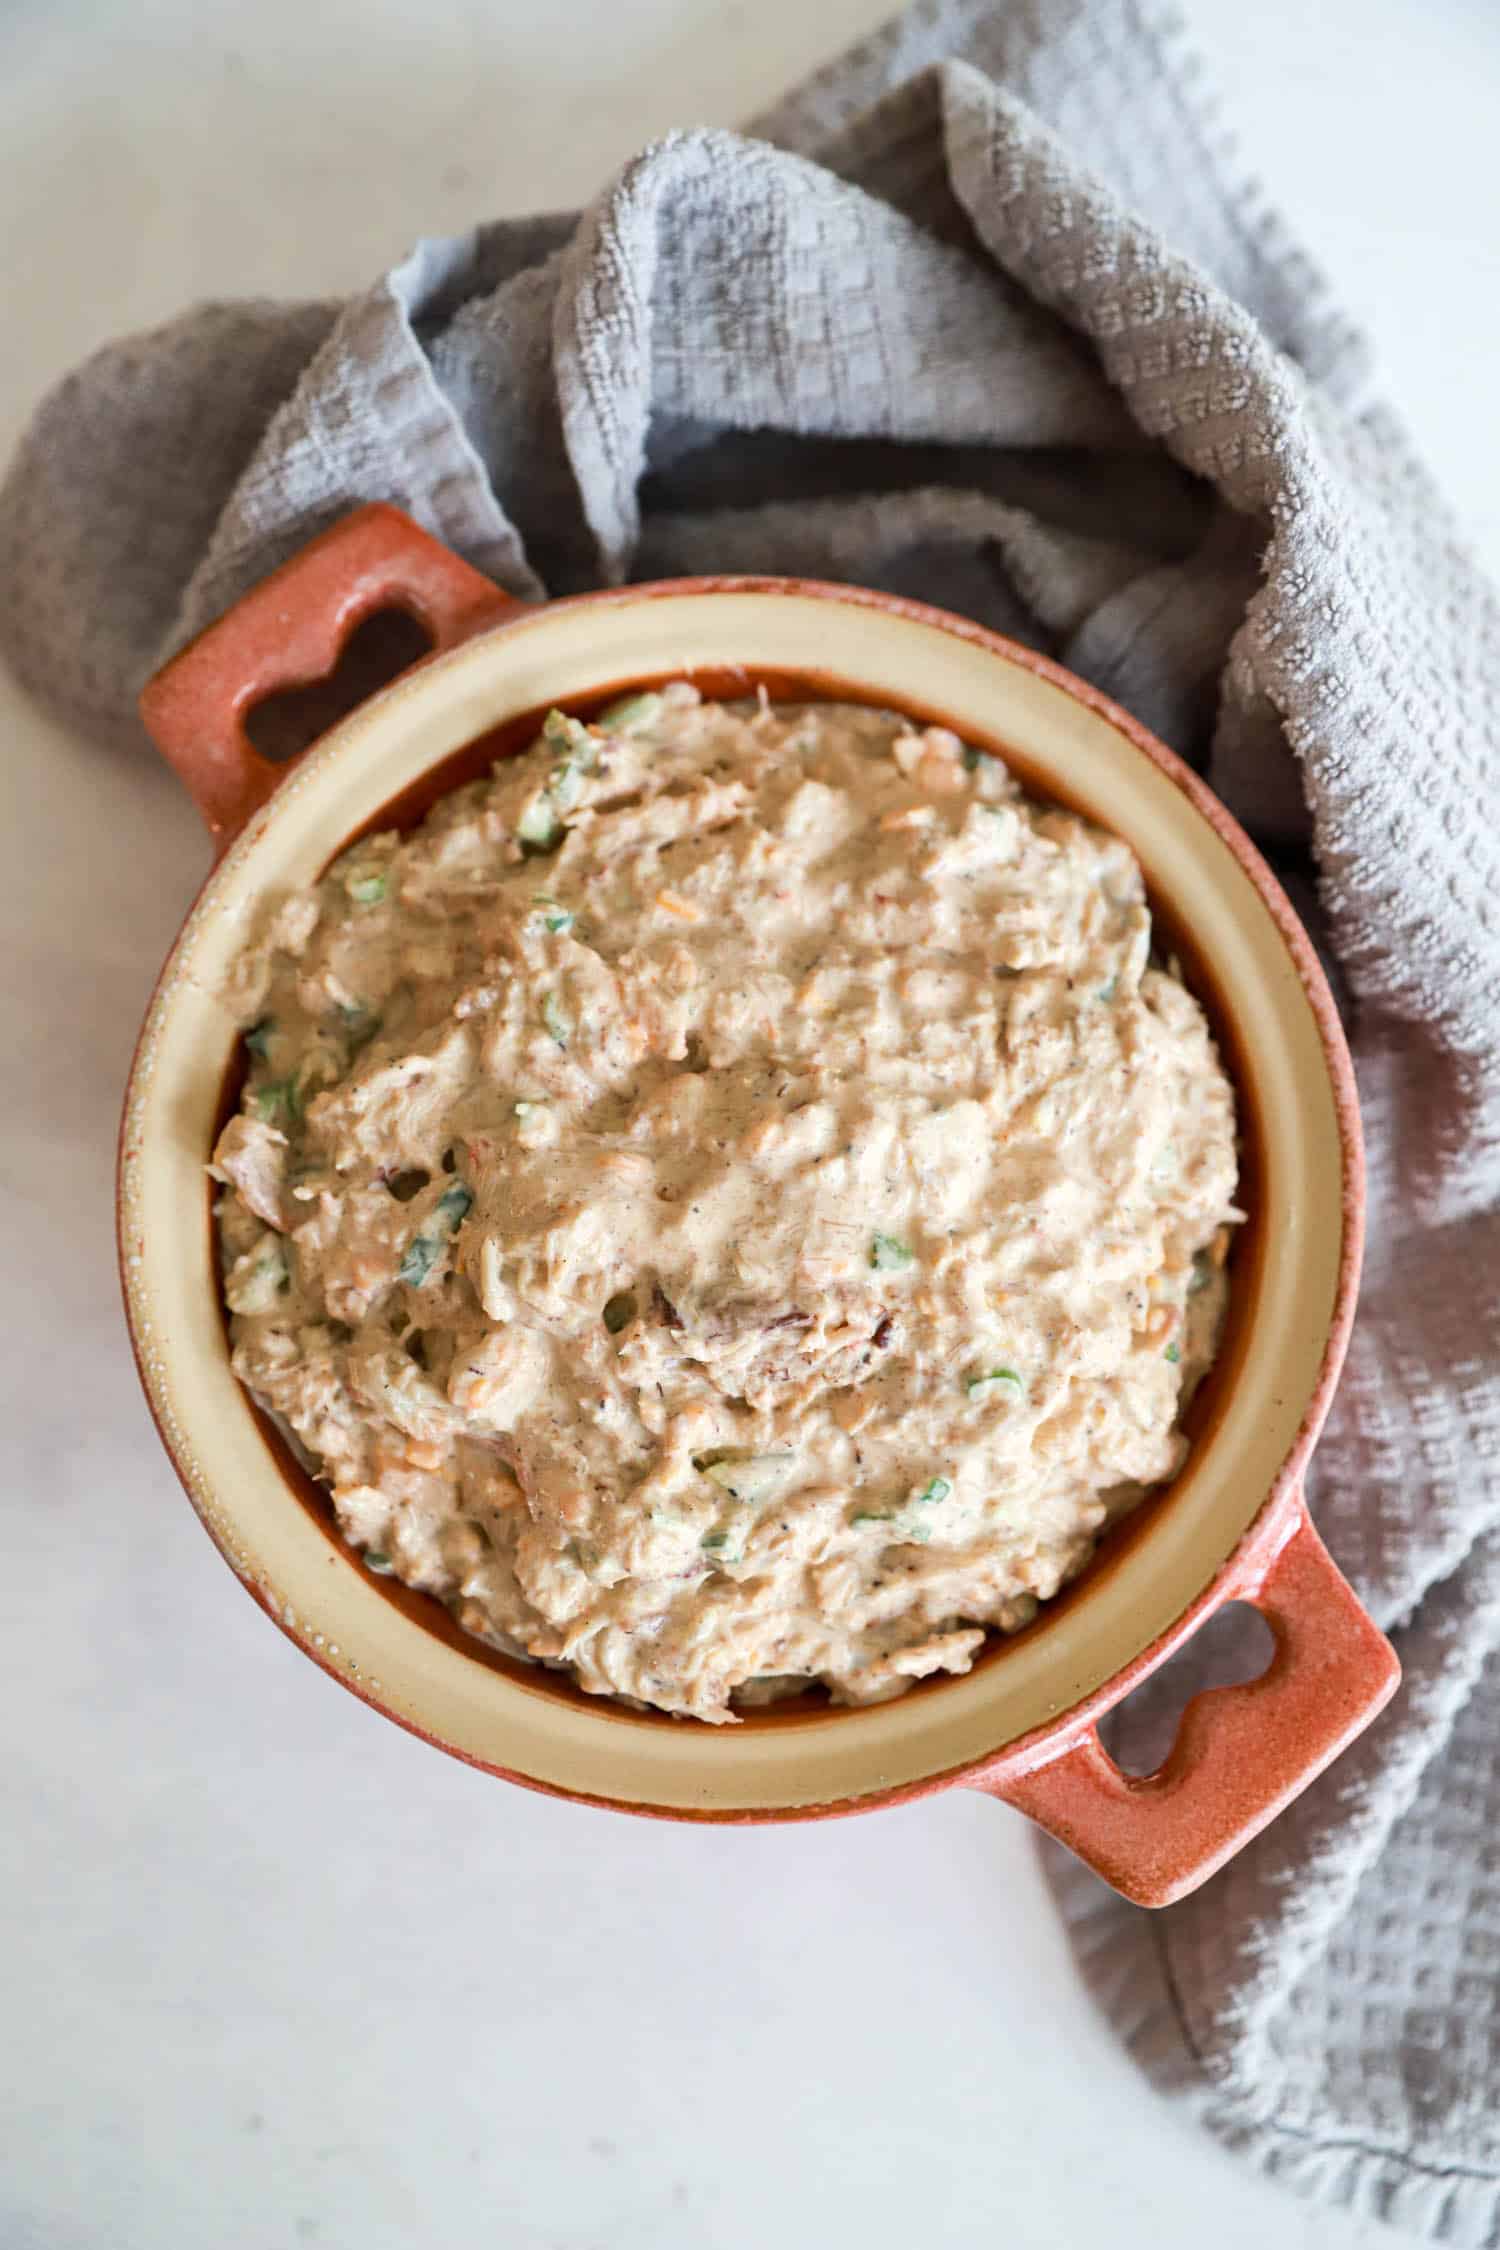 Unbaked crab dip in a small salmon colored round baking dish.